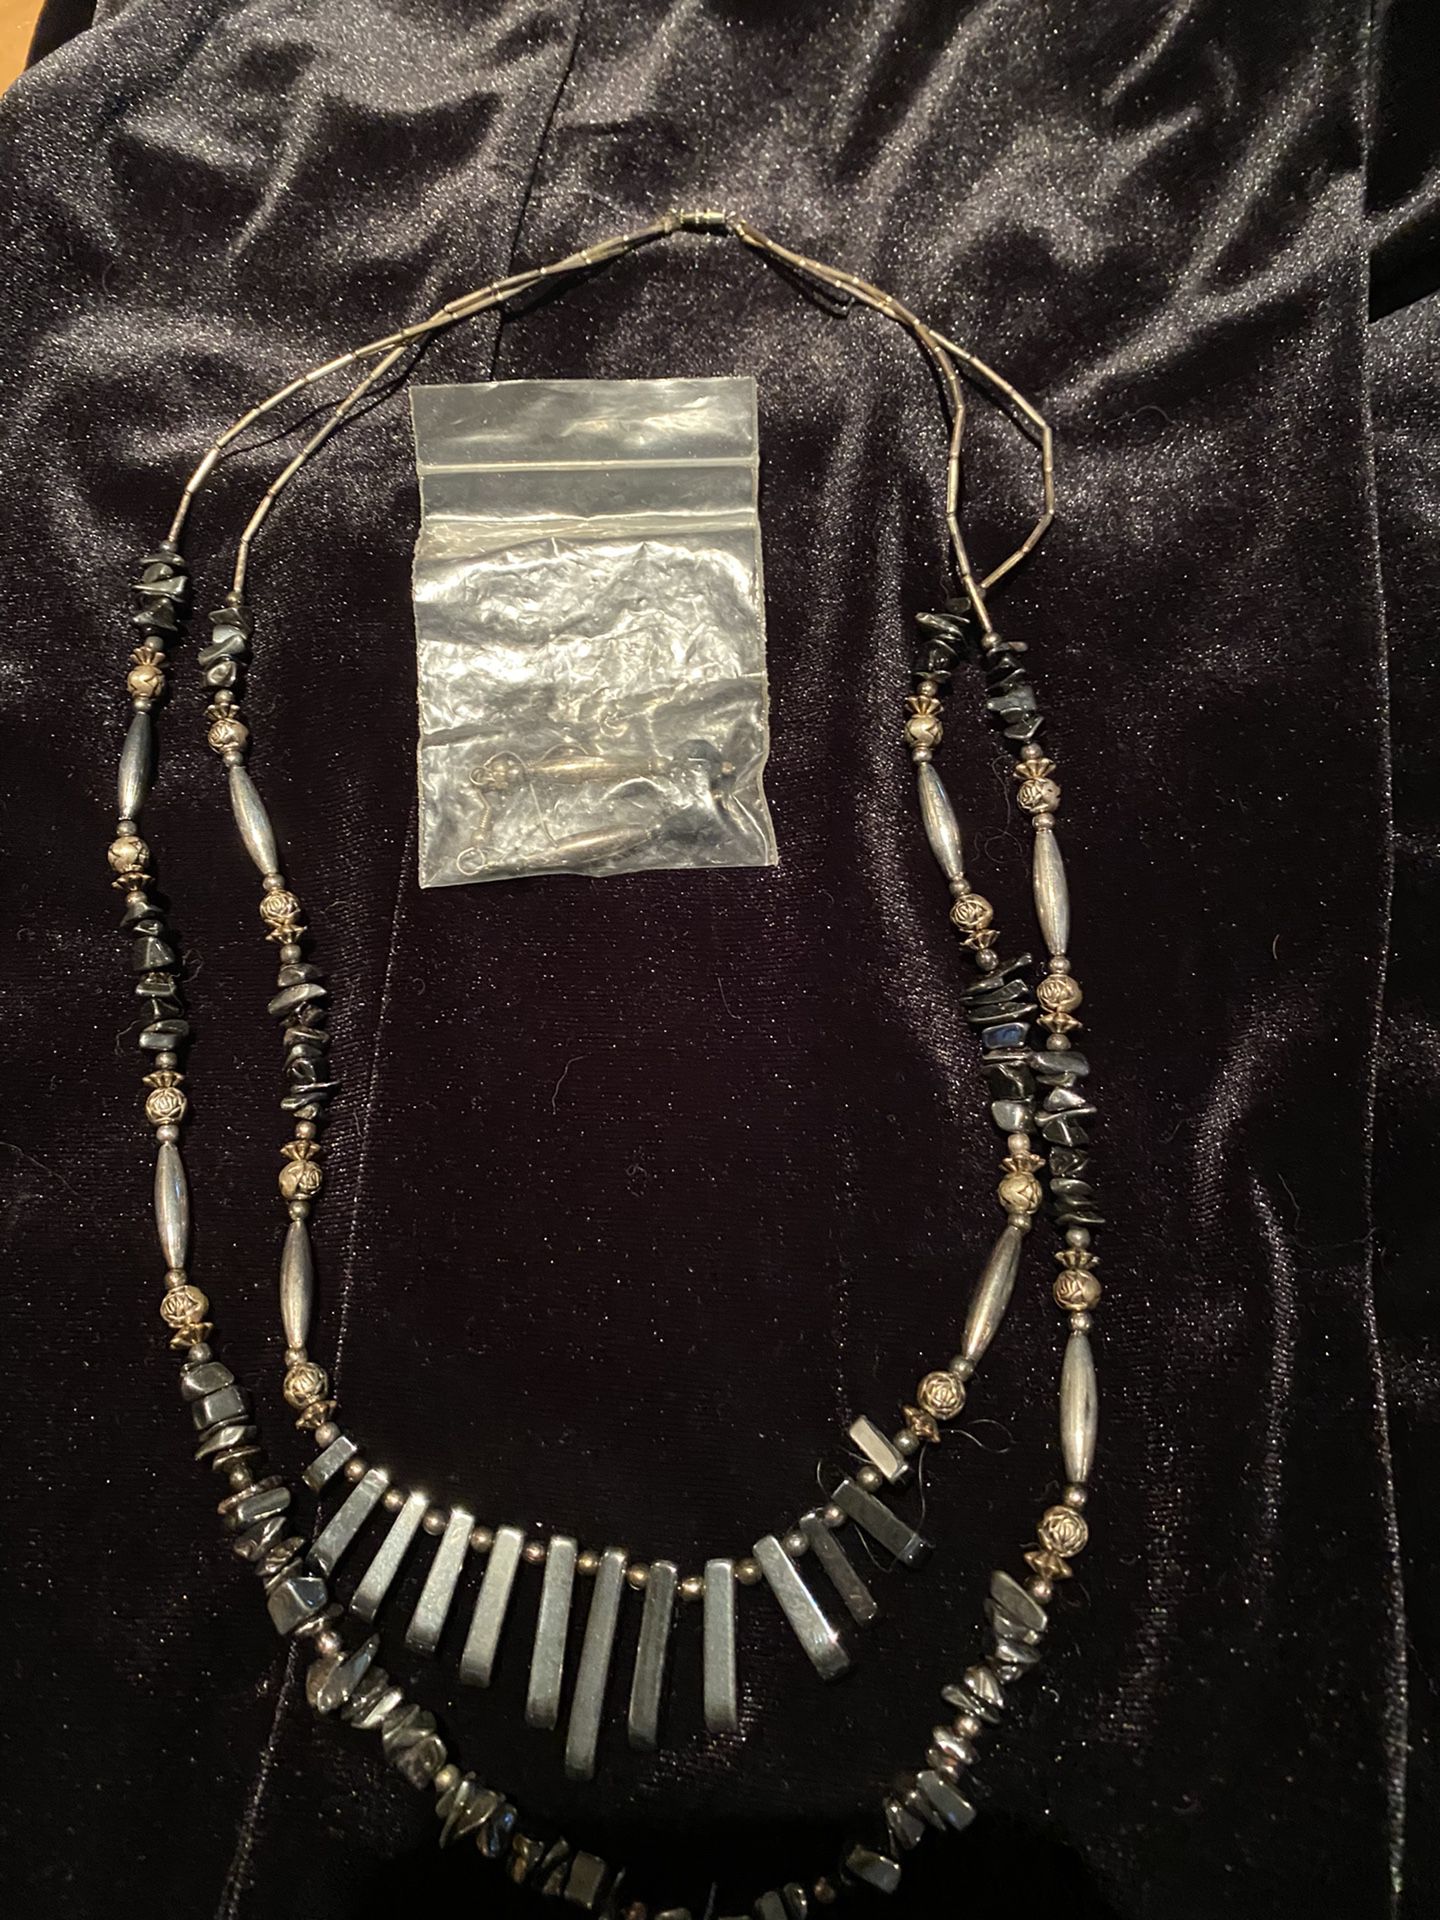 Mexican silver/black beaded necklace- earrings set from Mexico all $35